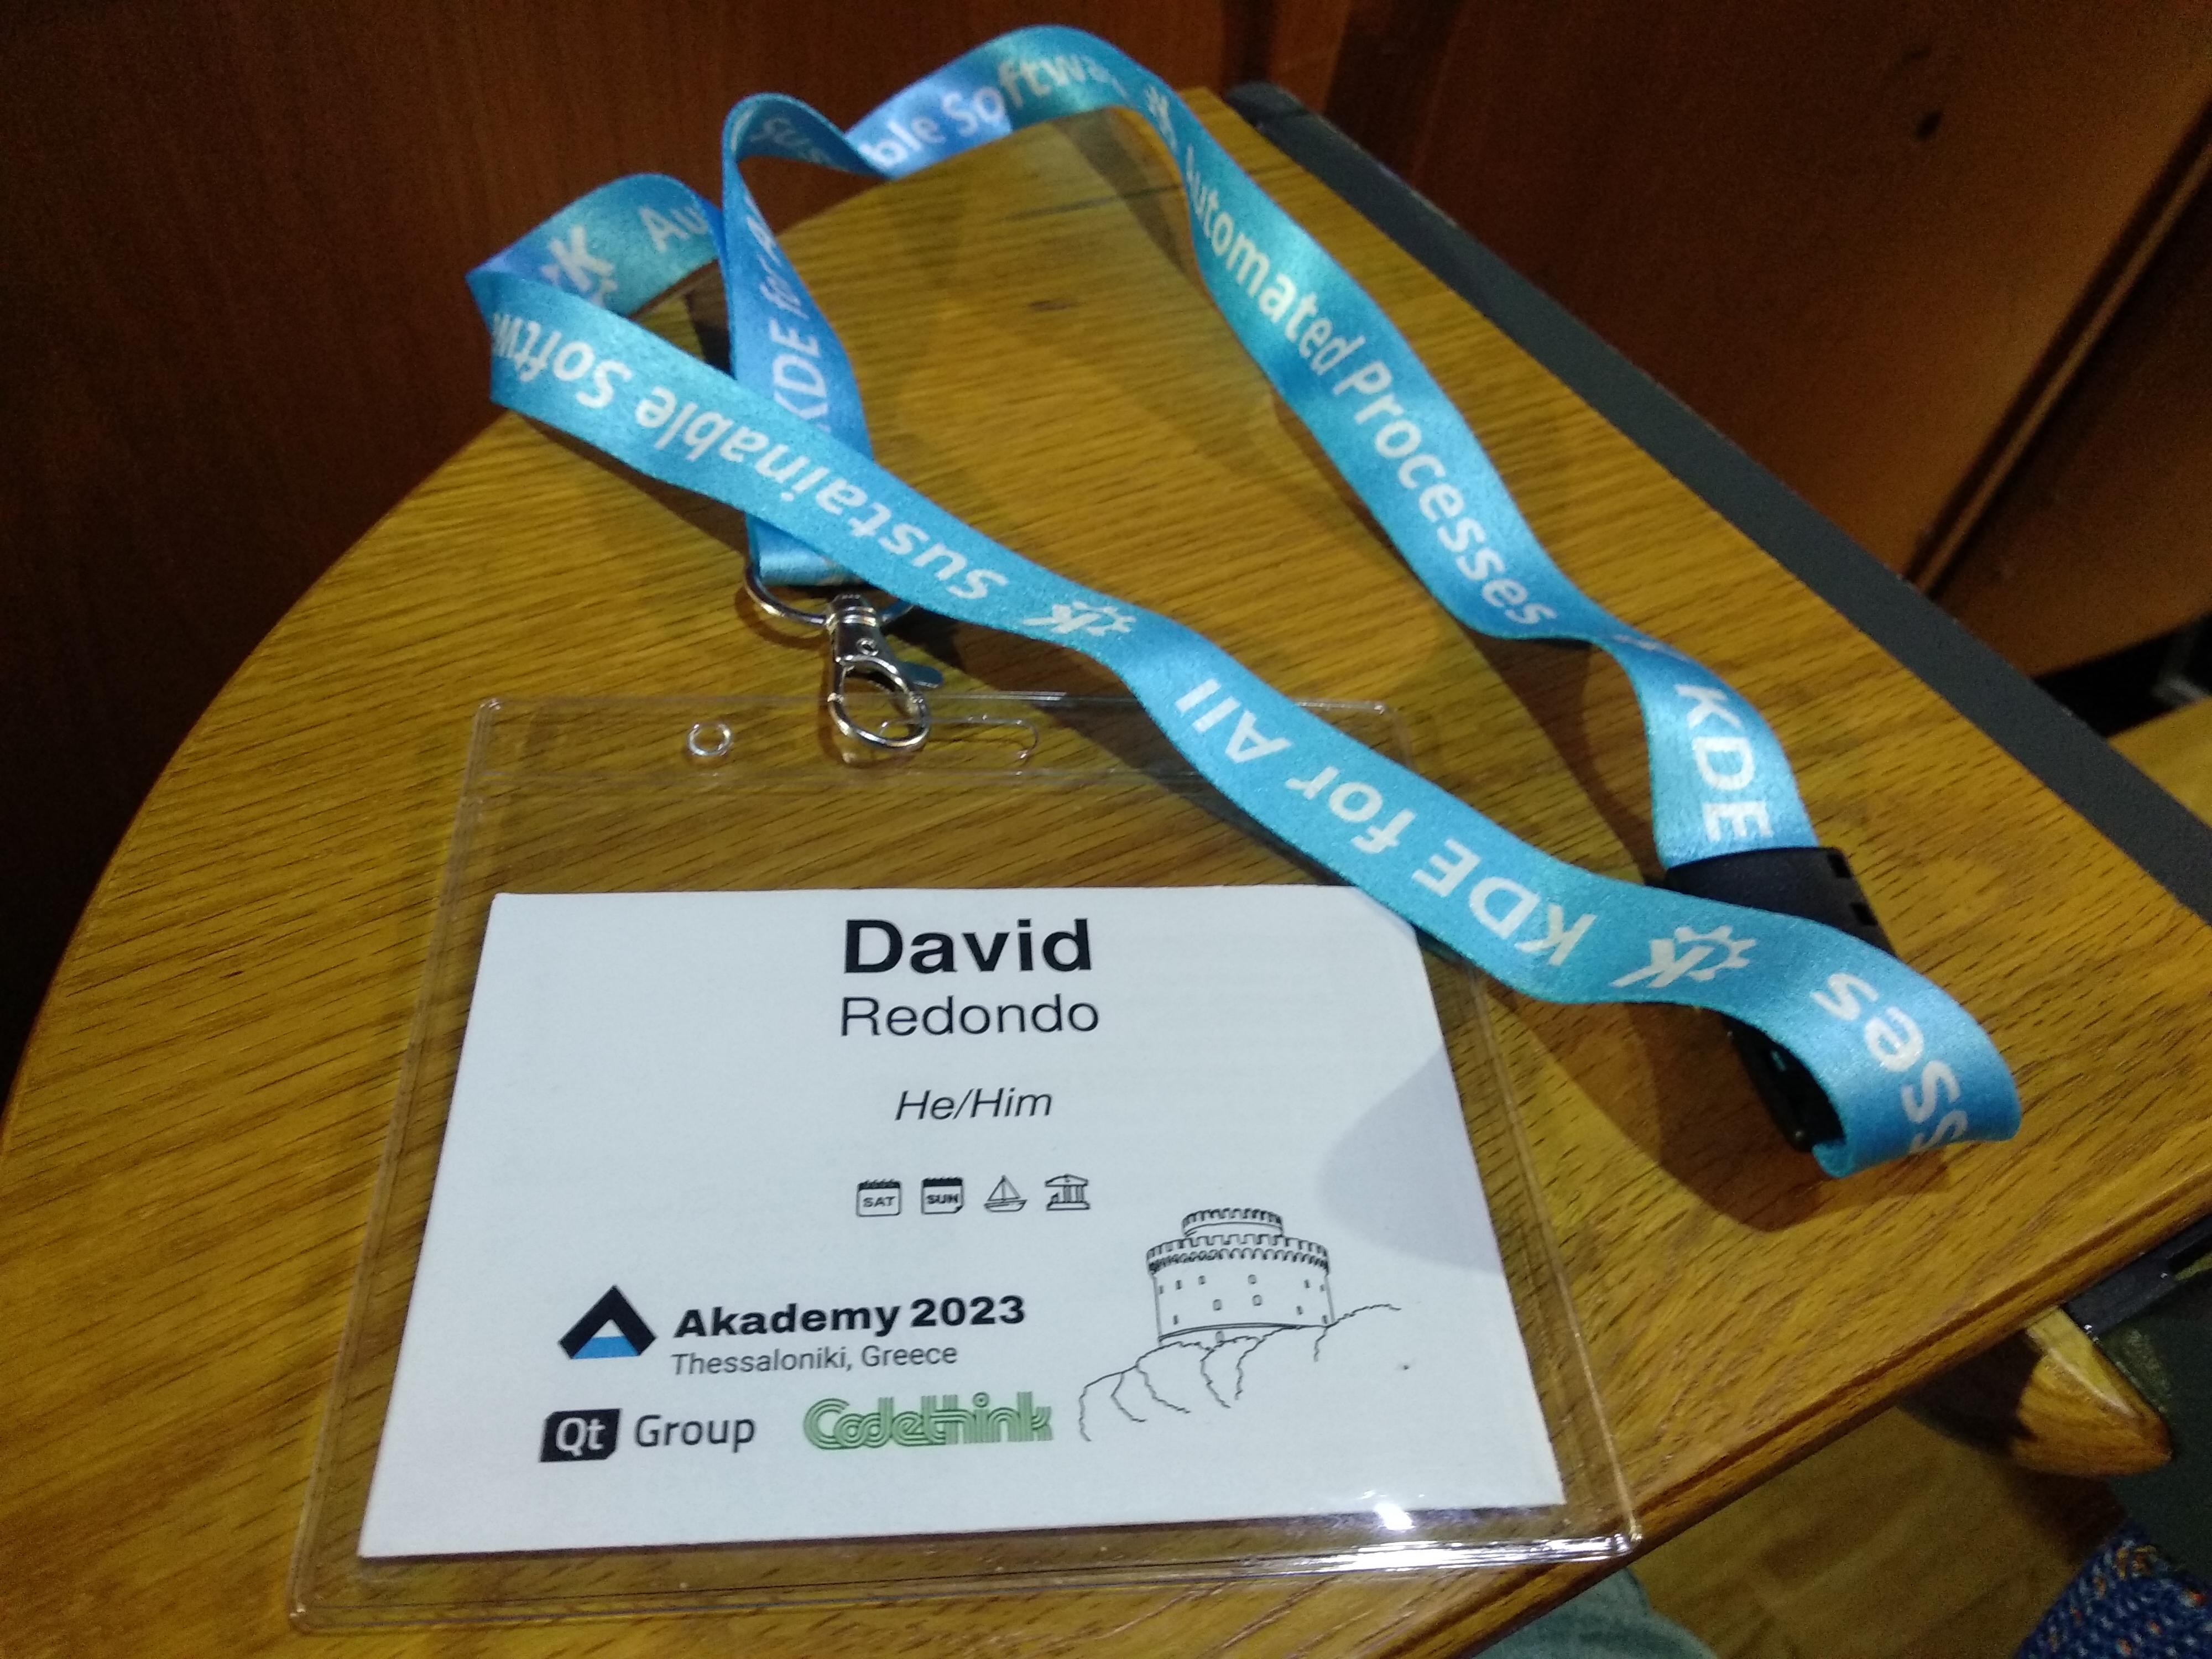 My conference badge